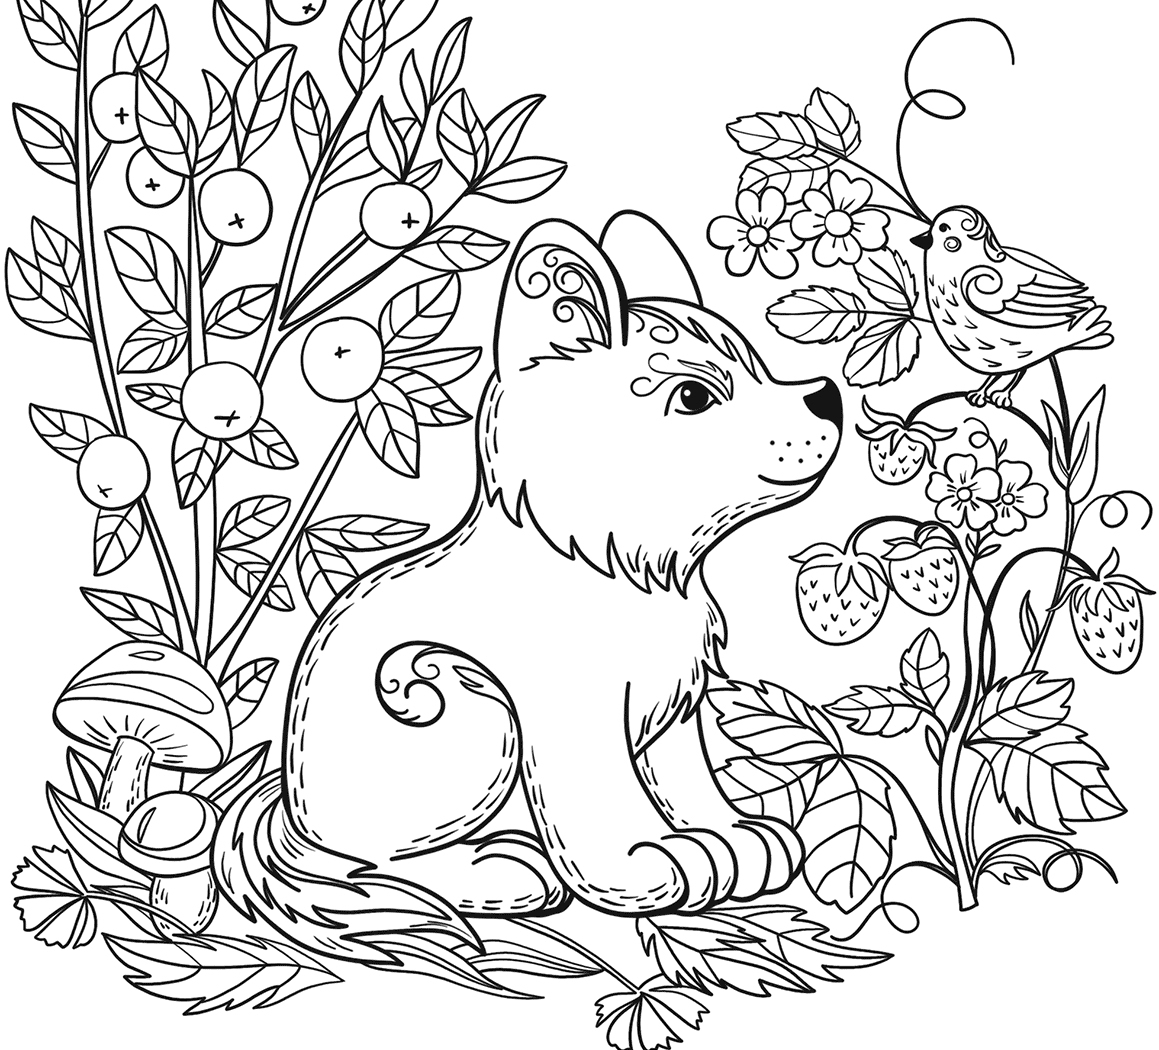 Free Animal Coloring Pages Fresh Wild Gallery Printable Sheet 1159 - Free Printable Wild Animal Coloring Pages